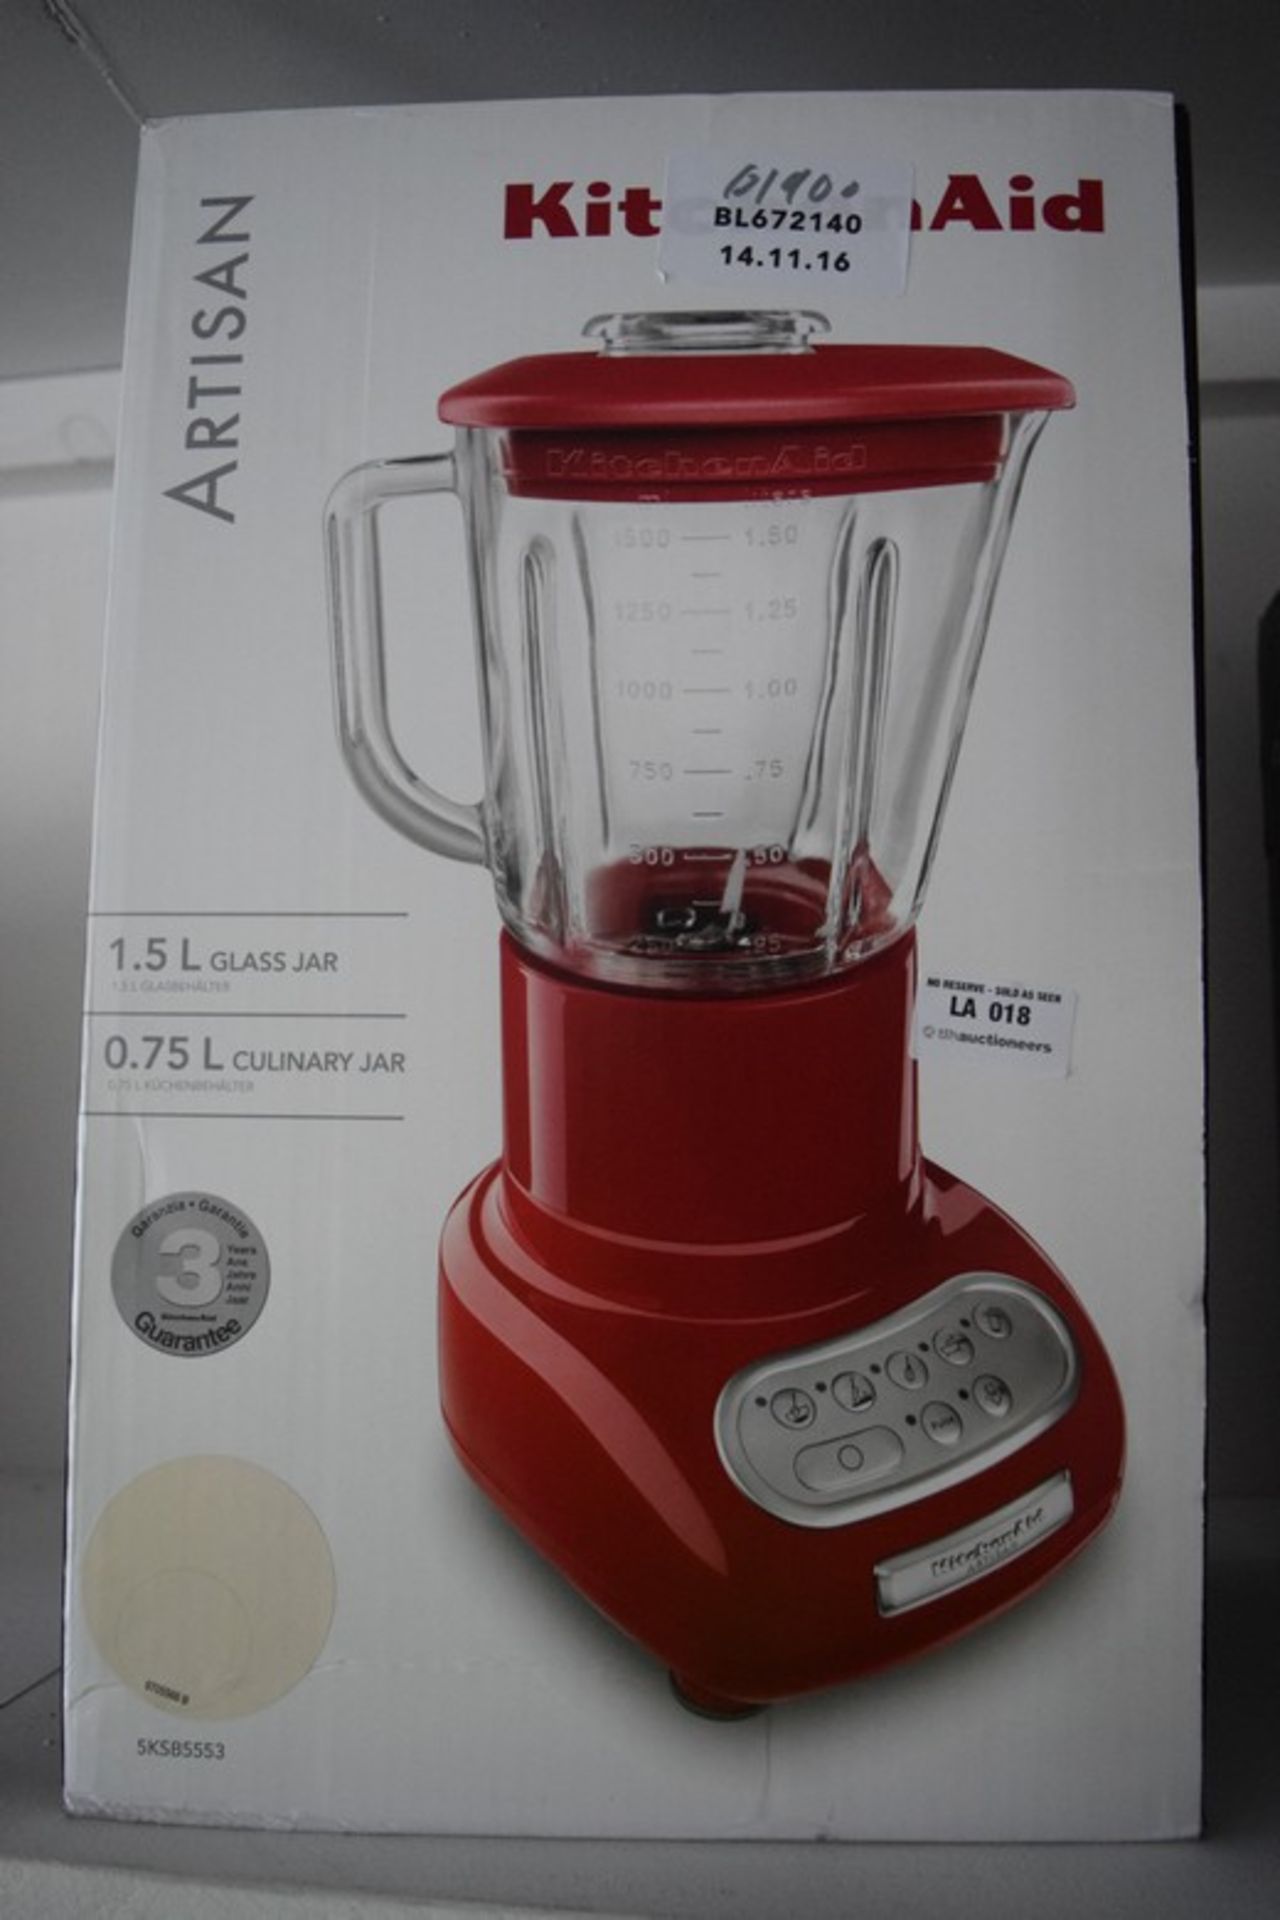 1 x BOXED KITCHENAID ARTISAN 1.5L CLASSIC BLENDER IN CREAM RRP £190 (14.11.2016) *PLEASE NOTE THAT